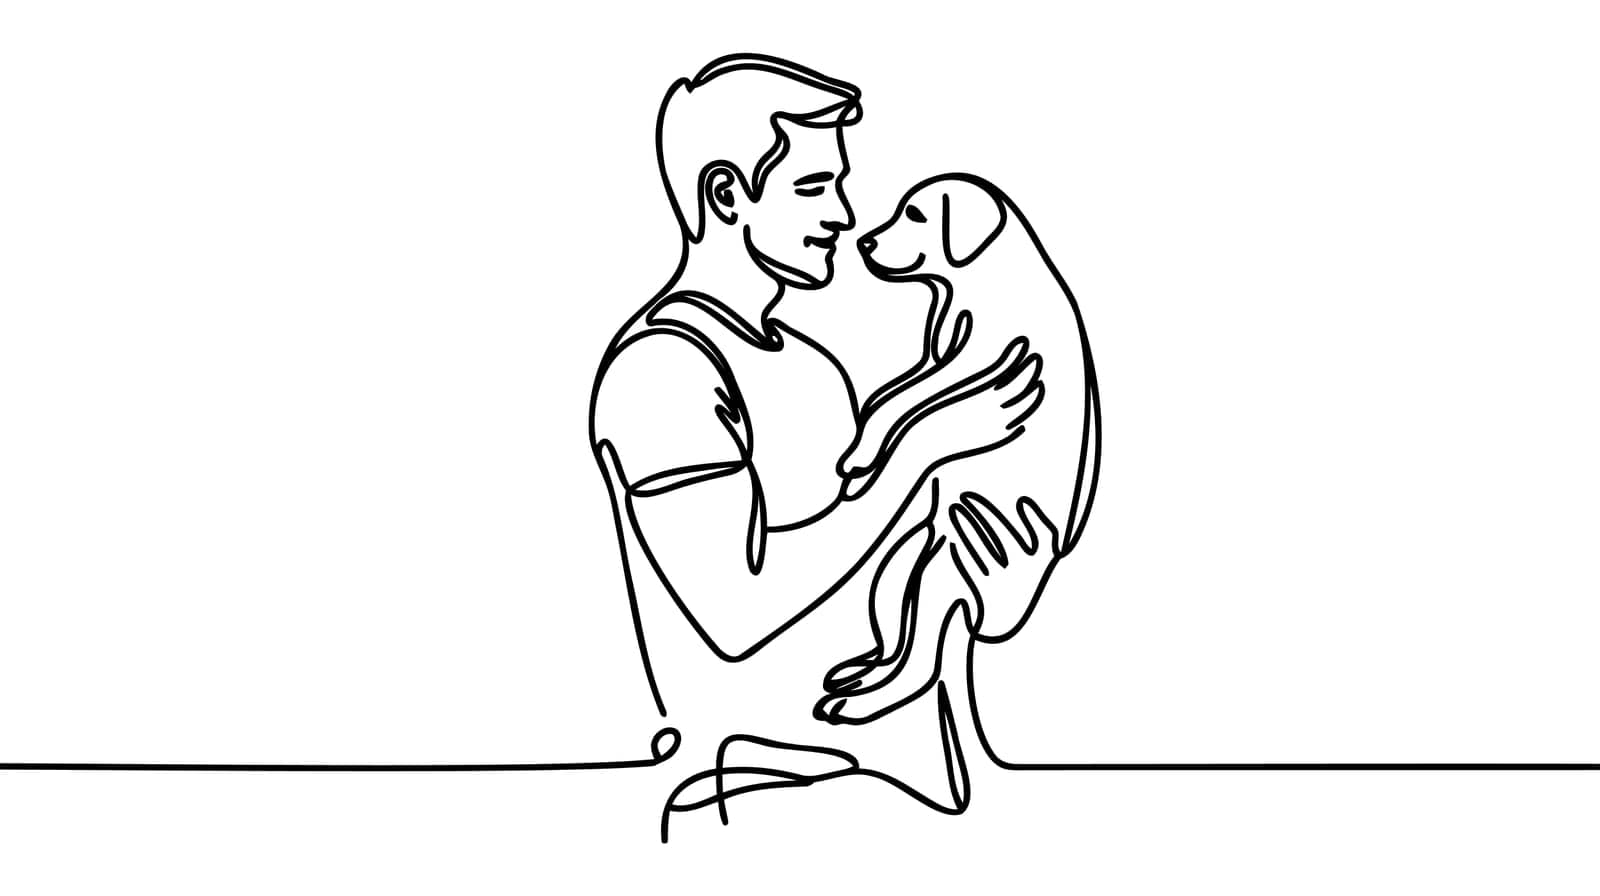 Man holds a dog in his hands or walks with him - one line art vector. concept dog owner, dog grooming by Artisttop